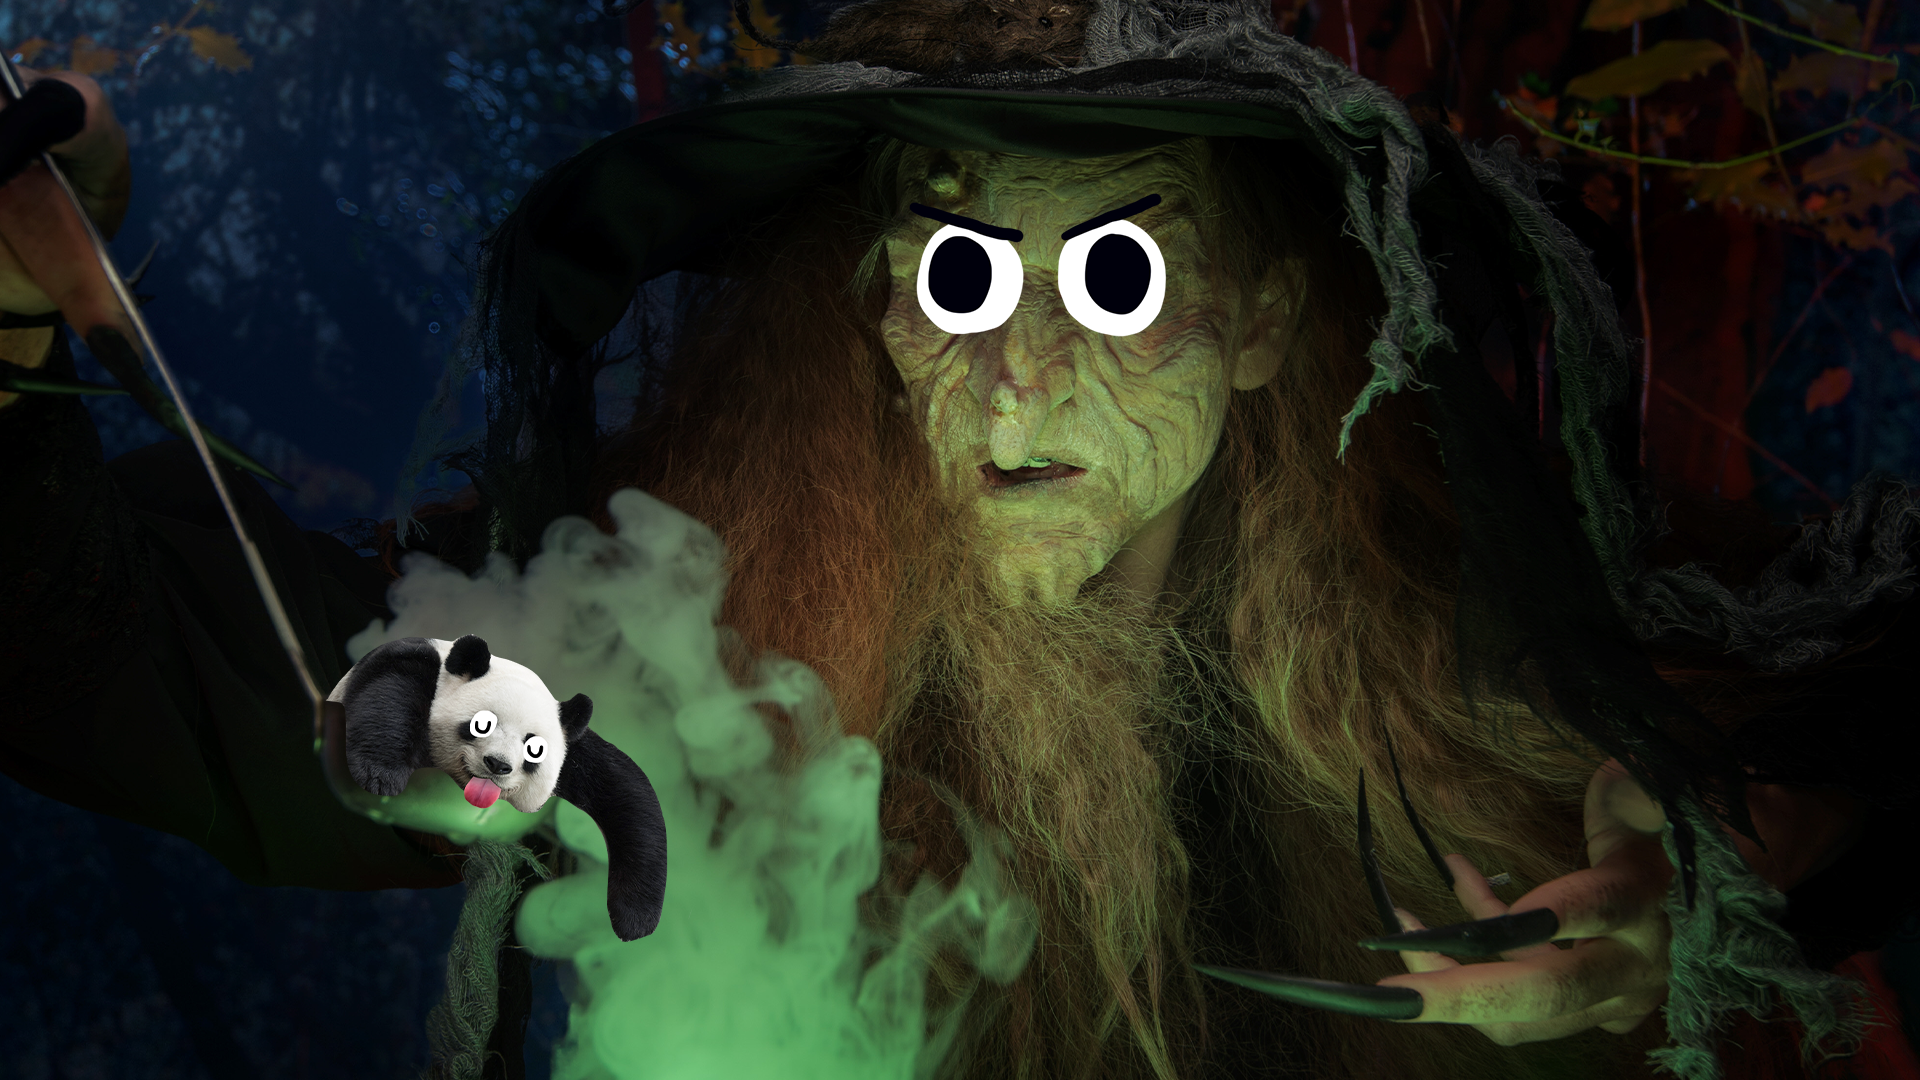 Creepy old witch and derpy panda